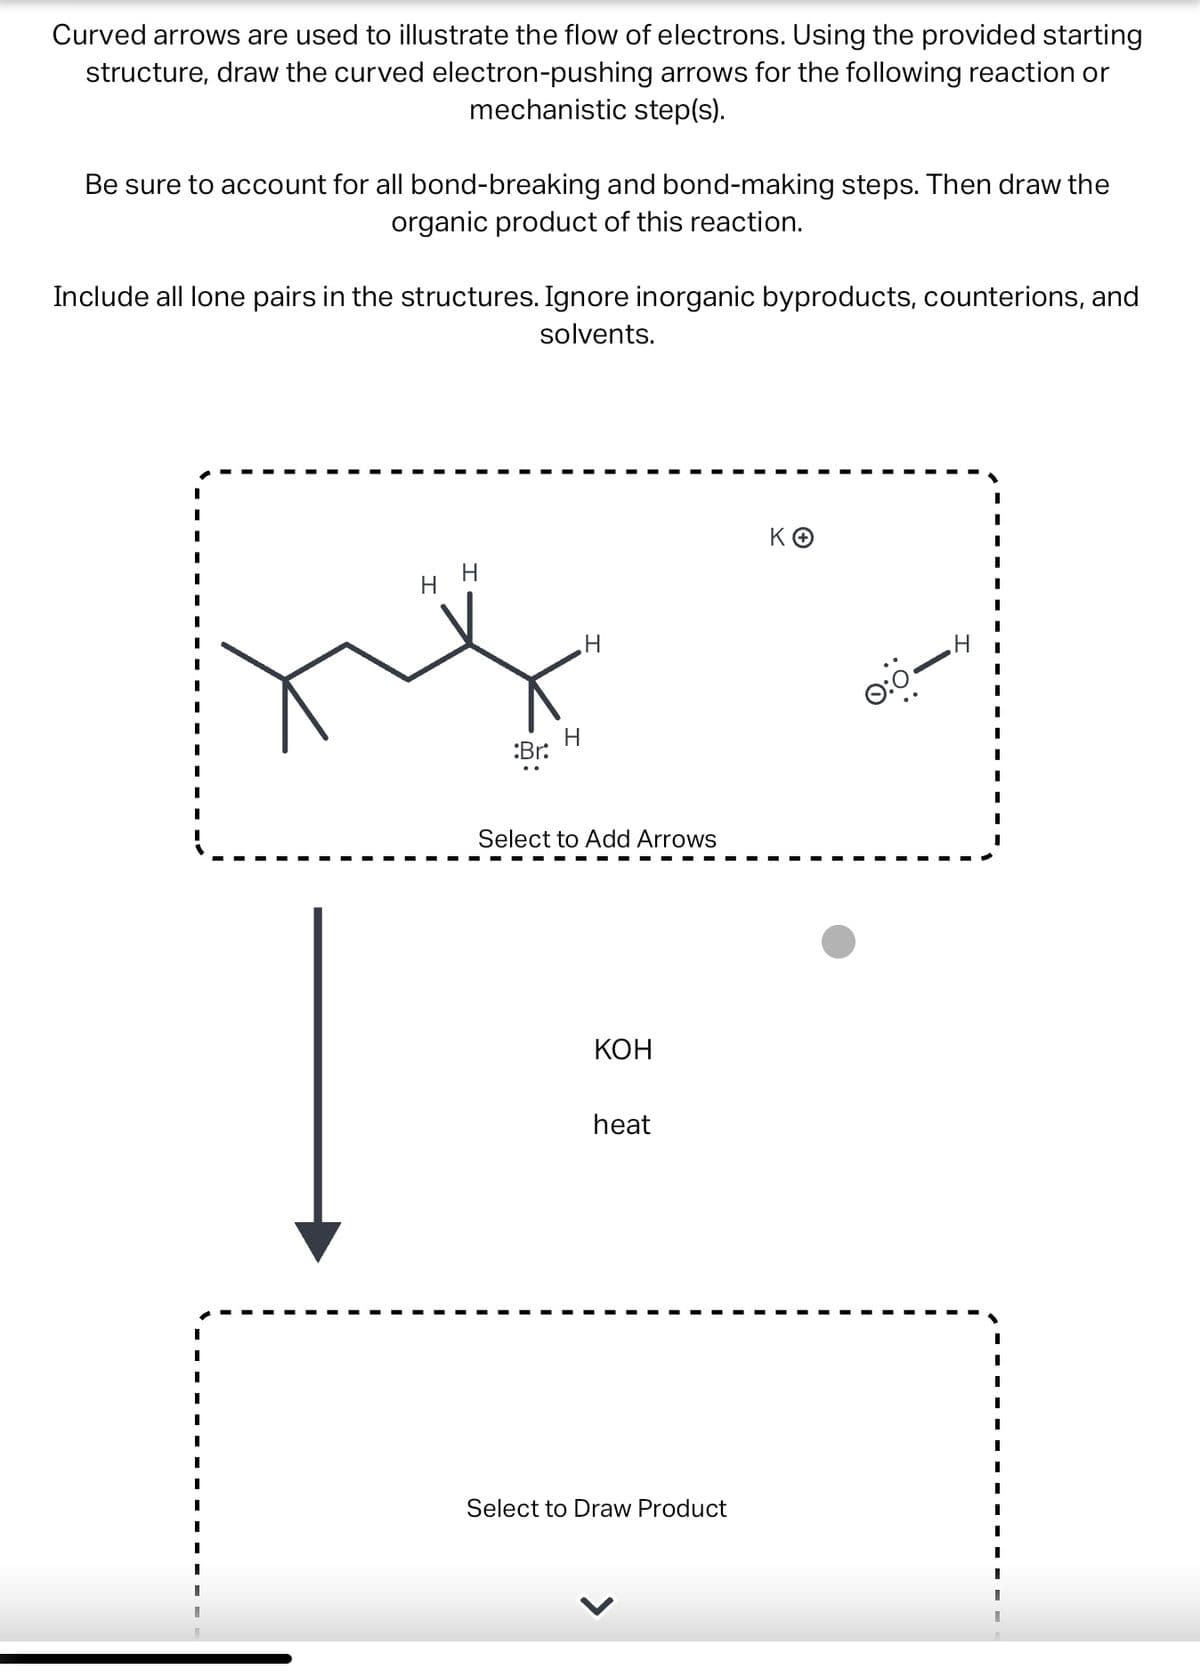 Curved arrows are used to illustrate the flow of electrons. Using the provided starting
structure, draw the curved electron-pushing arrows for the following reaction or
mechanistic step(s).
Be sure to account for all bond-breaking and bond-making steps. Then draw the
organic product of this reaction.
Include all lone pairs in the structures. Ignore inorganic byproducts, counterions, and
solvents.
I
I
I
I
I
I
I
I
I
1
I
1
I
1
1
H
xx
:Br:
‚H
Select to Add Arrows
KOH
heat
Select to Draw Product
KO
0:0-